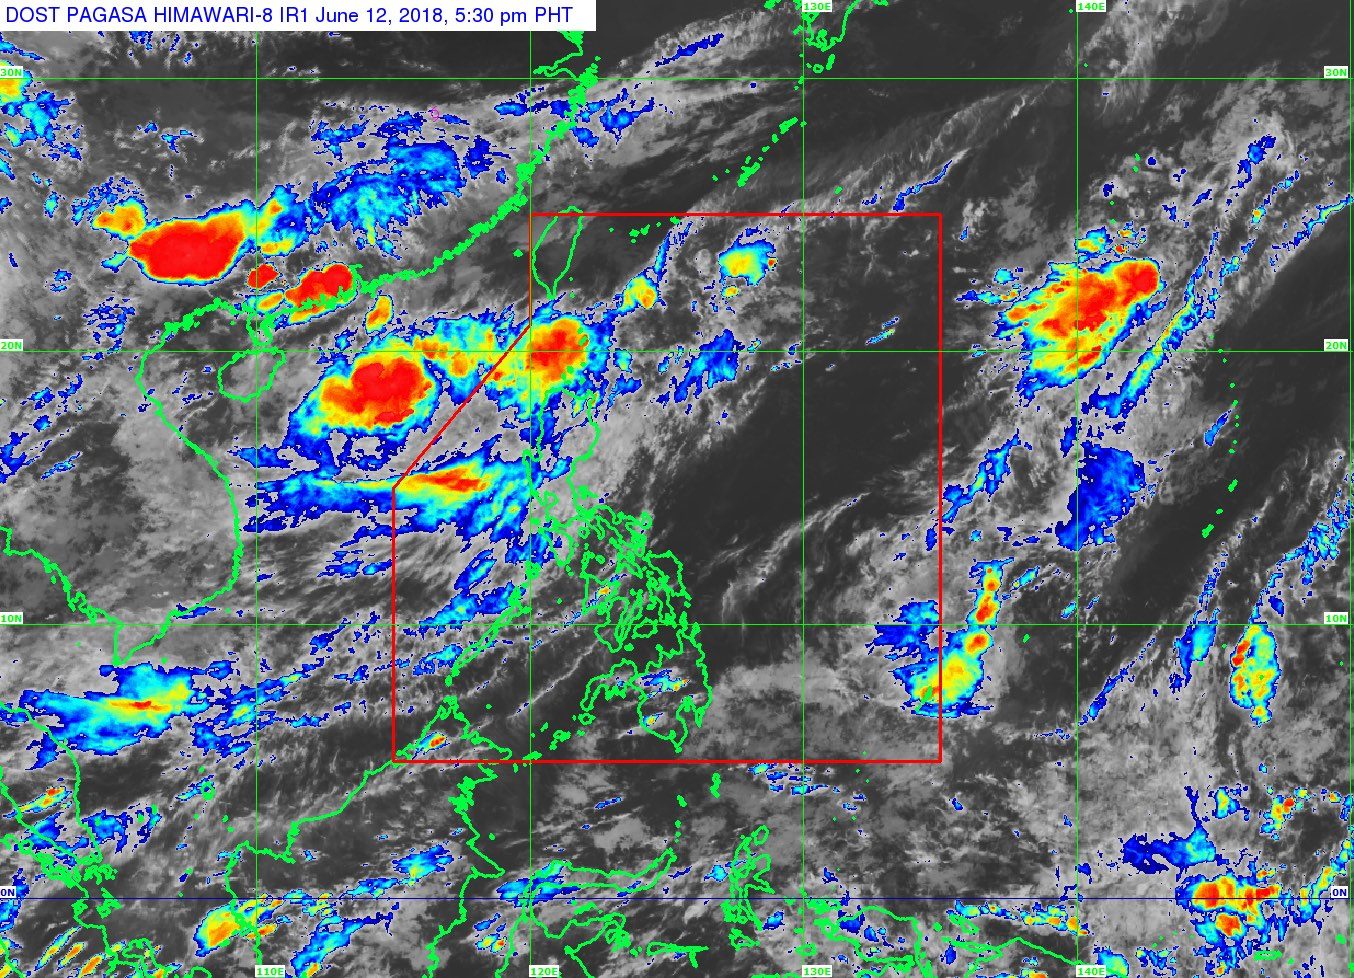 Rainy June 13 for Luzon due to southwest monsoon